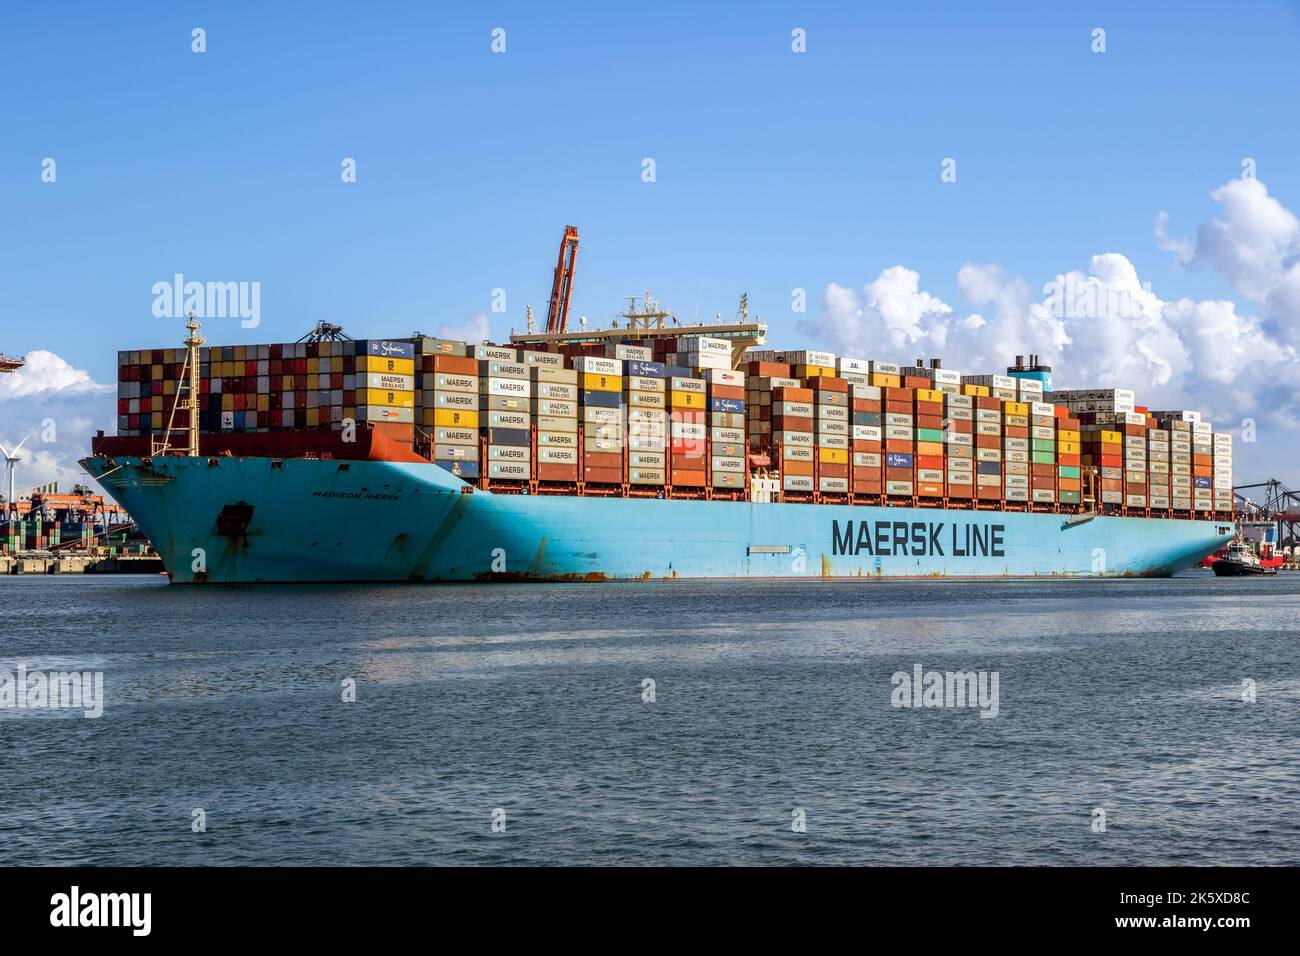 One of the largest Very Large Container Vessels (VLCV) in the world, Container ship Madison Maersk, entering the Maasvlakte 2 in the Port of Rotterdam Stock Photo